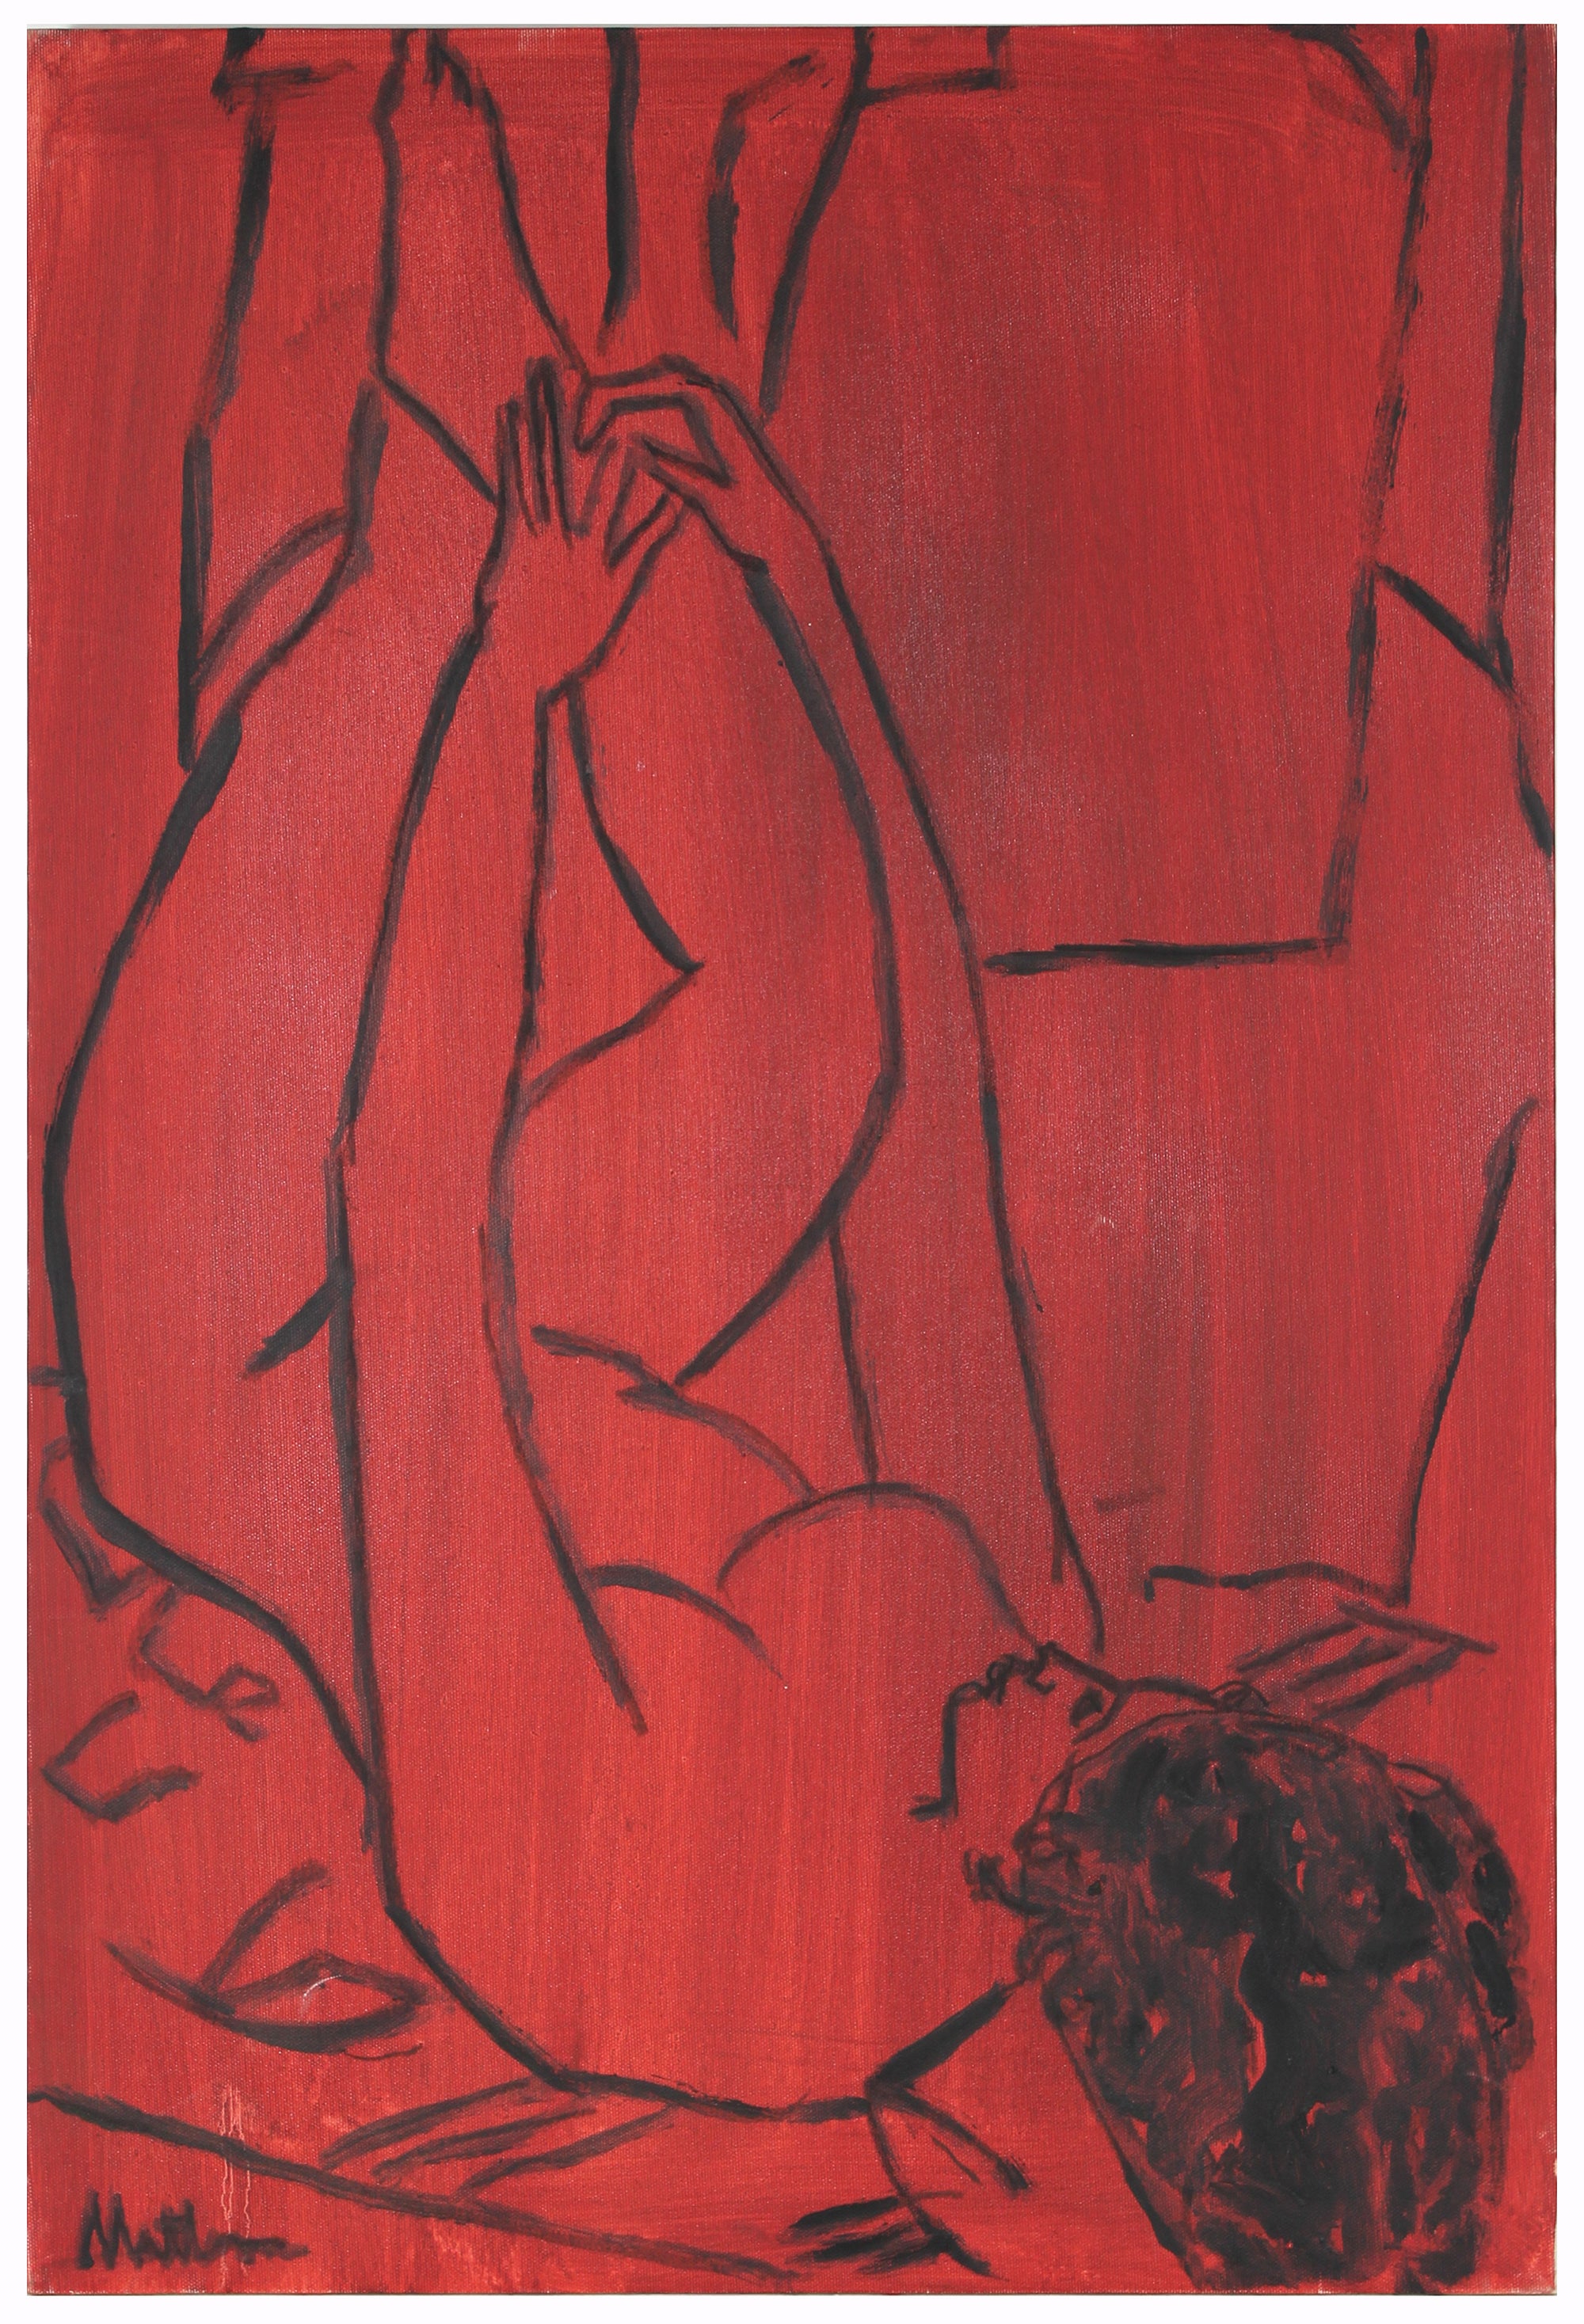 Striking Red & Black Nude <br>20th Century Oil <br><br>#56581